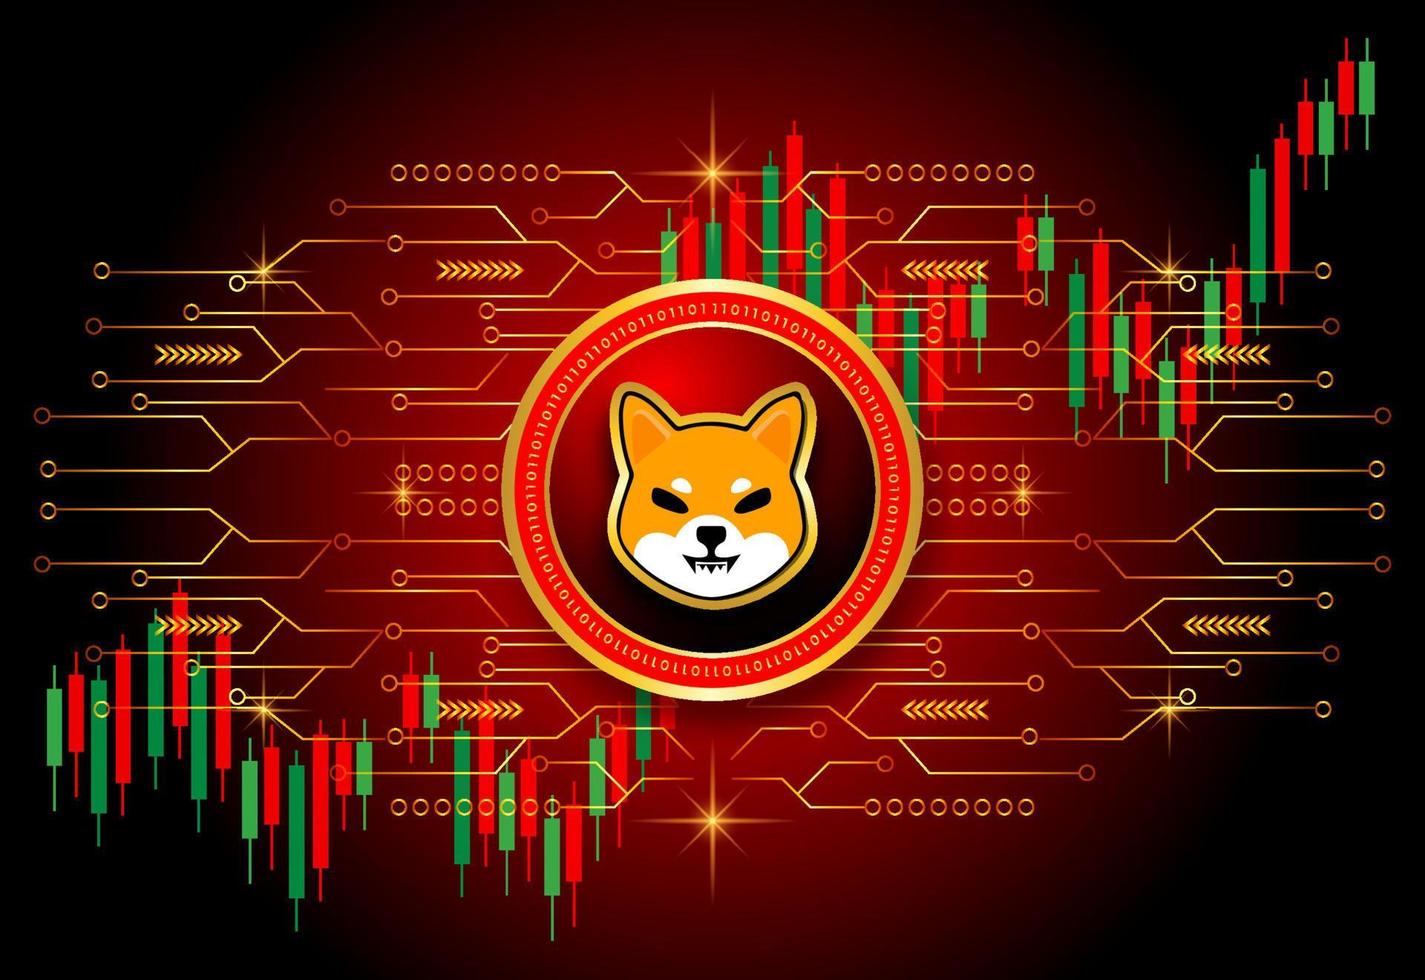 Shiba inu coin cryptocurrency network poster design vector